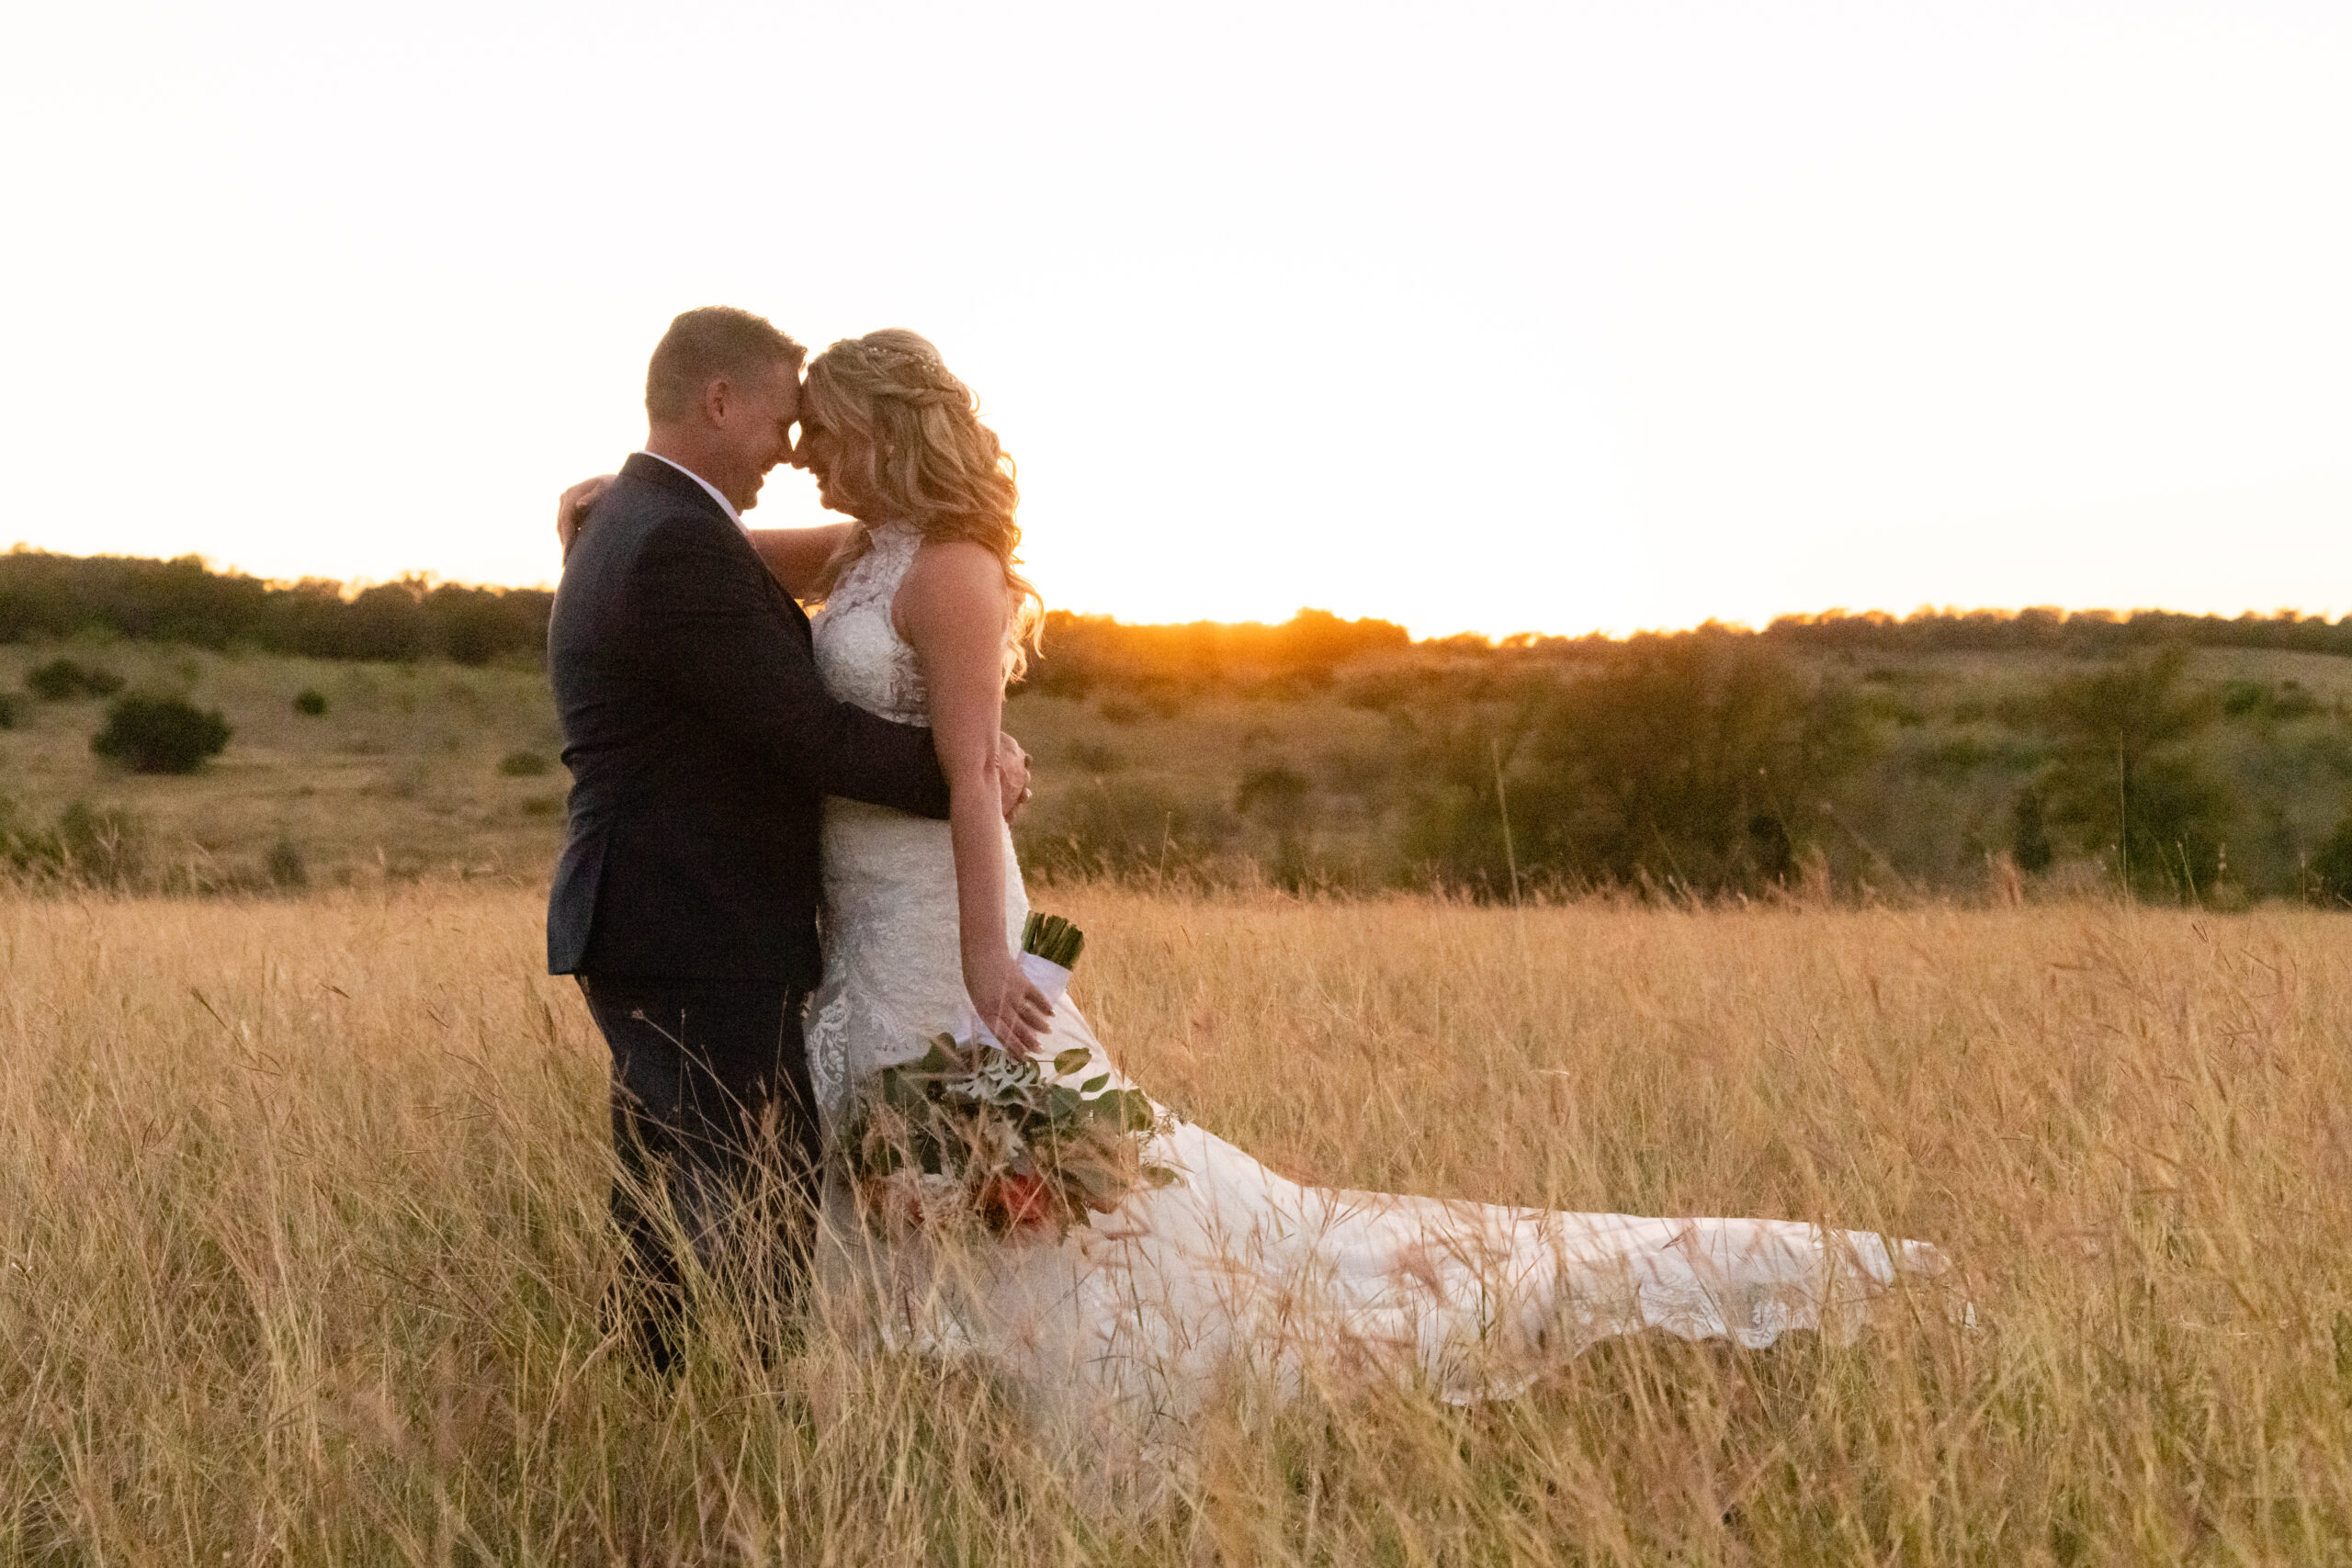 bride and groom wedding photo, wedding sunset photo, Harper Hill Ranch, Texas Hill Country Photographer, Texas Hill Country wedding photographer